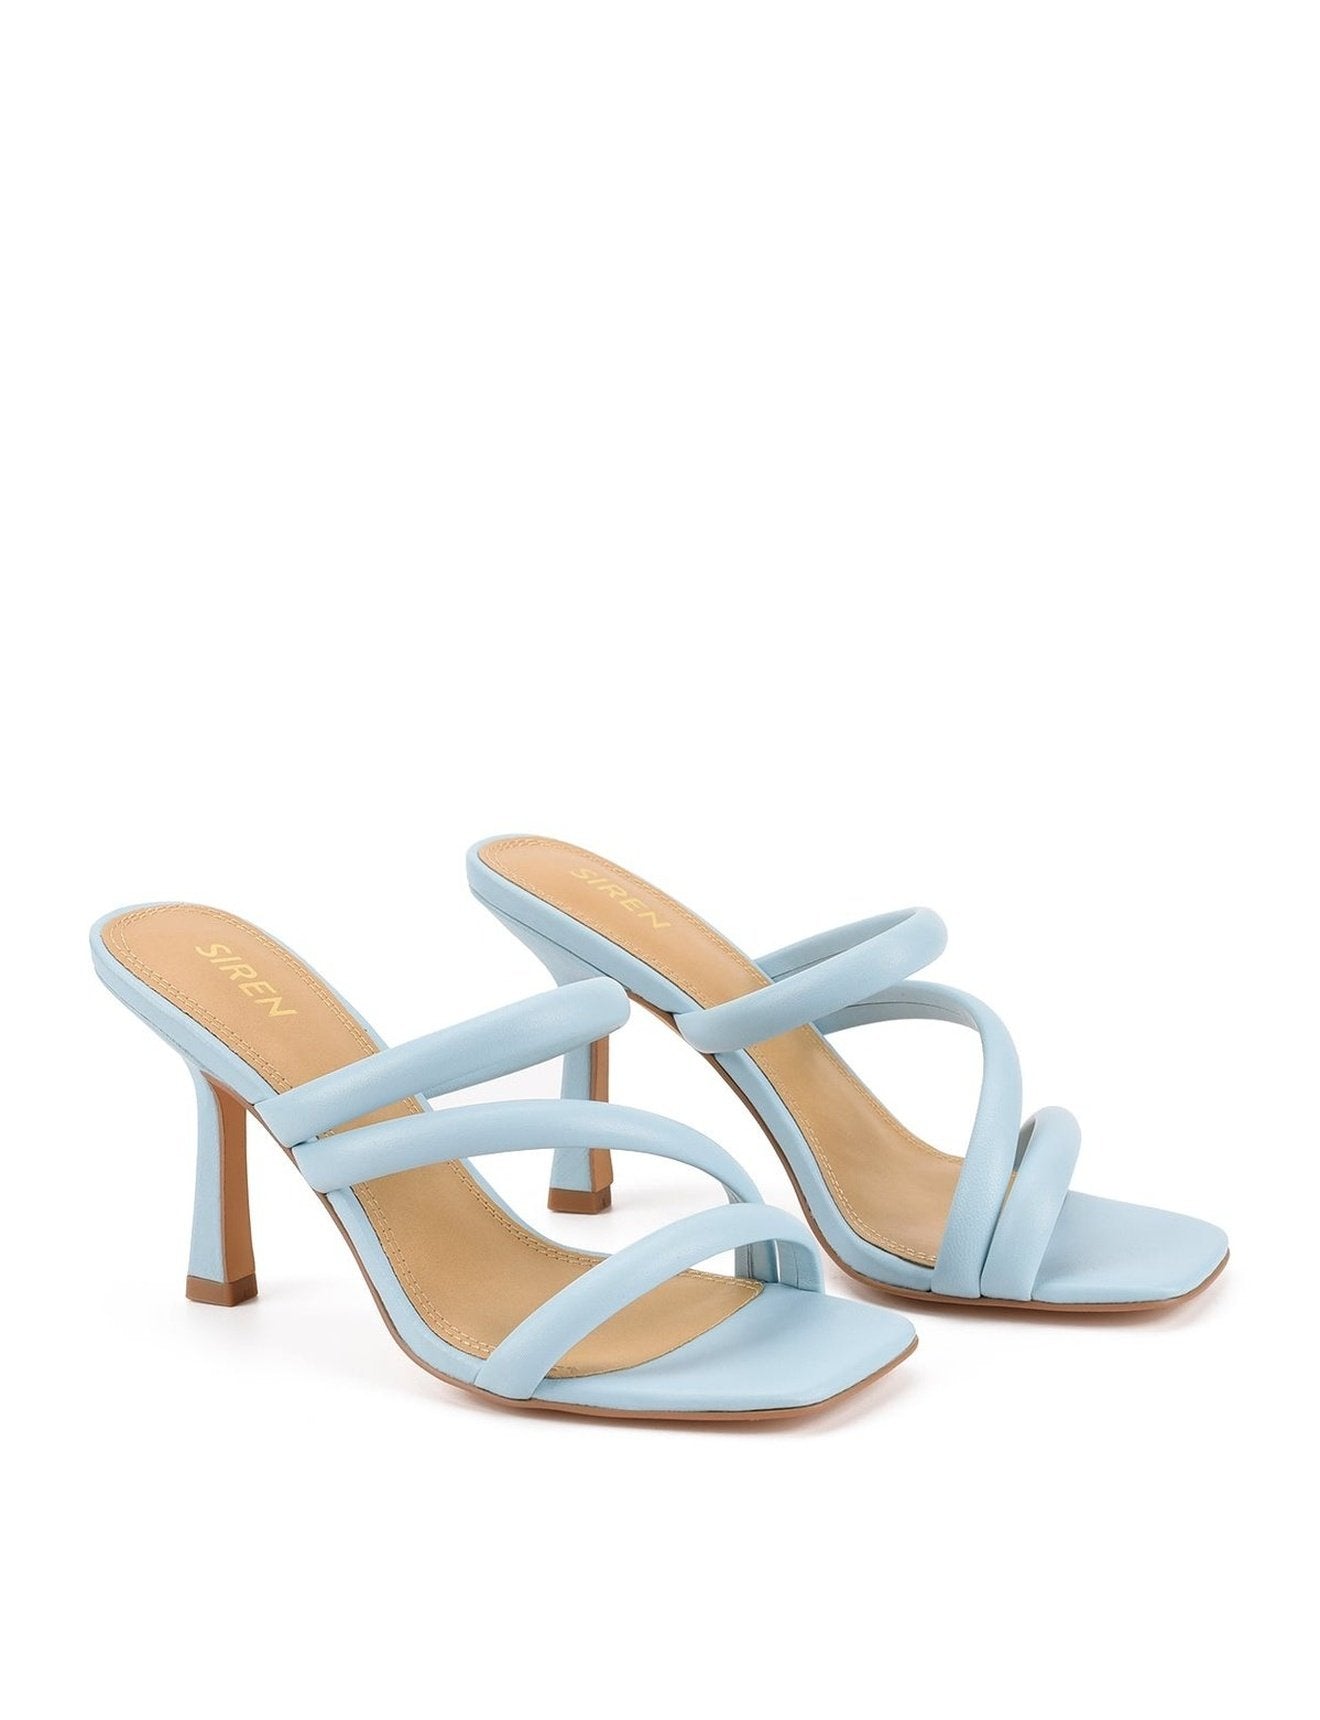 Women's pale blue leather strappy high heel sandal